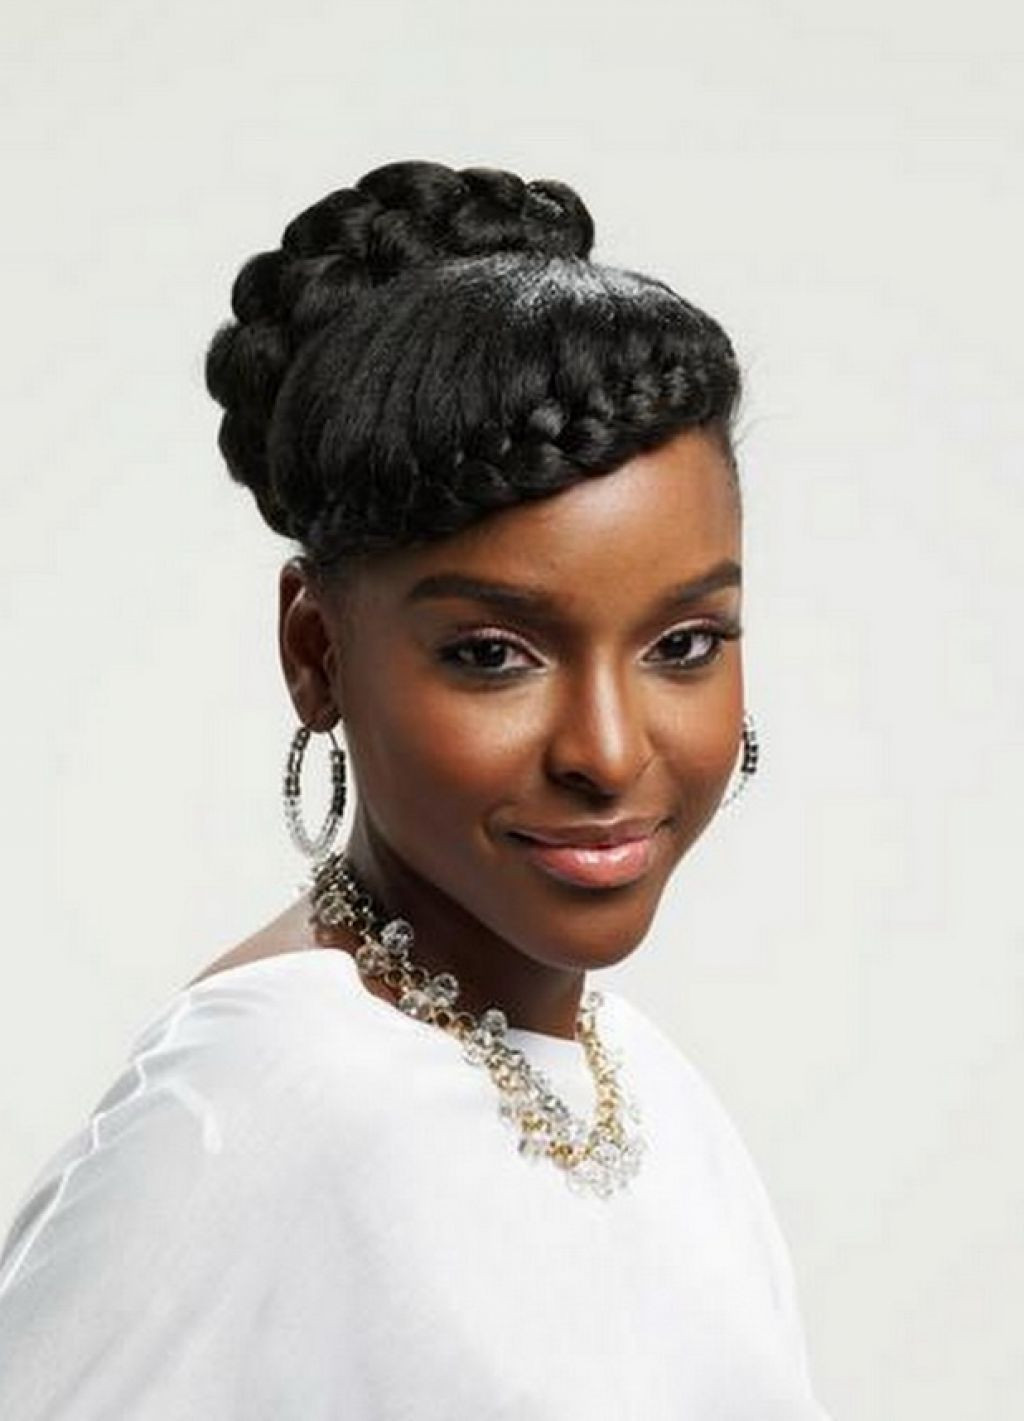 Updo Hairstyles For Black Women
 15 Fashionable Natural Updo Hairstyles for La s